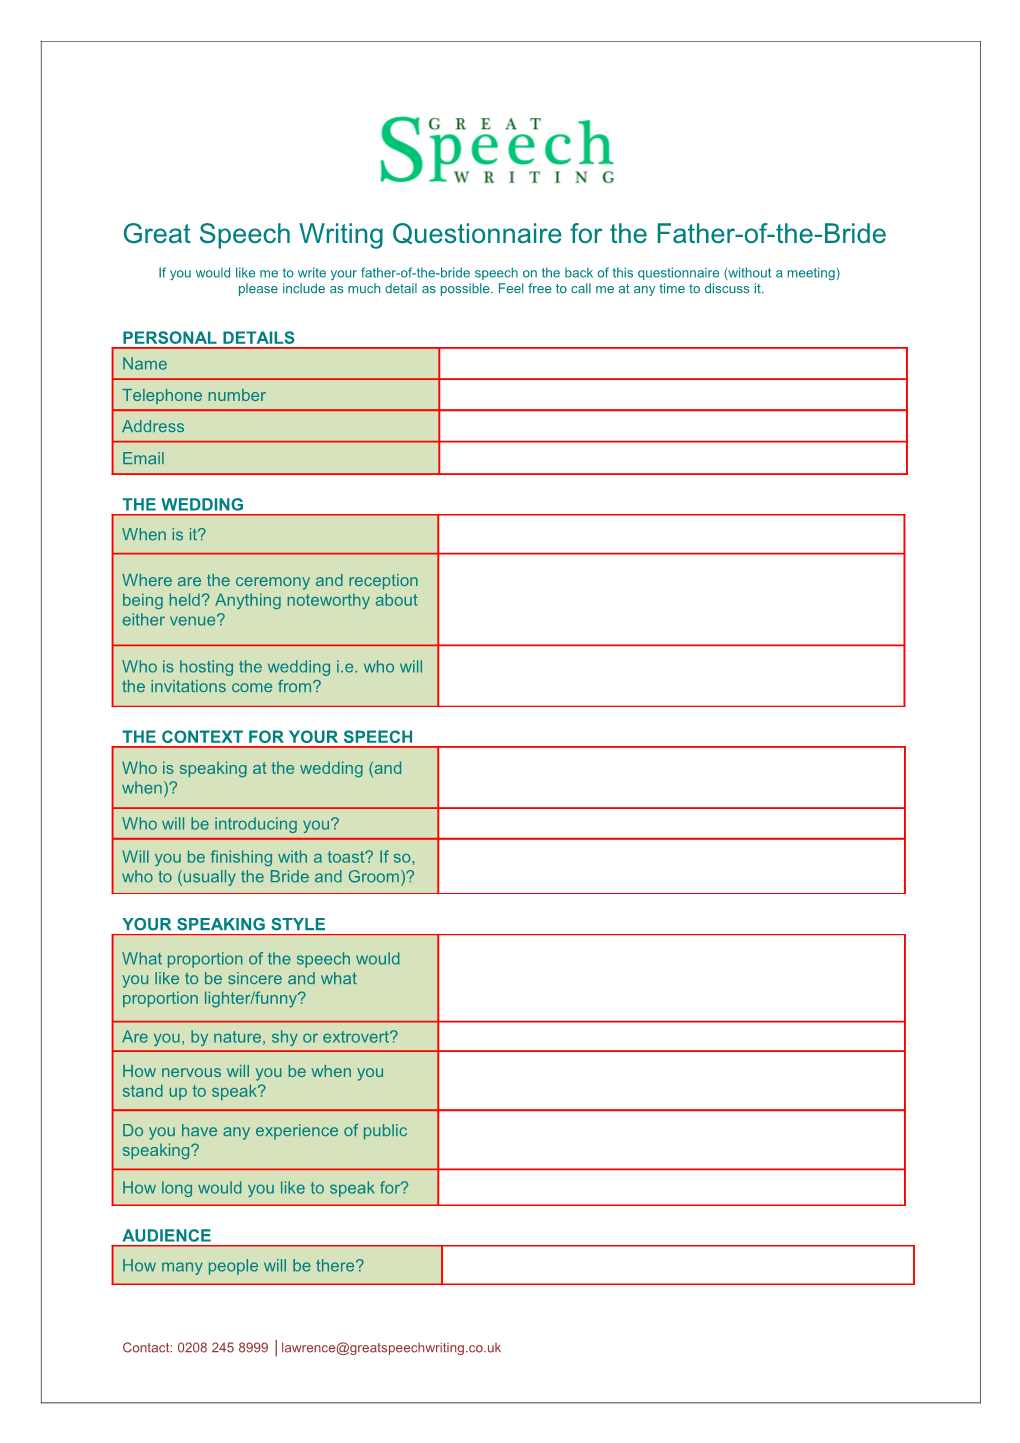 Great Speech Writing Questionnaire for the Father-Of-The-Bride